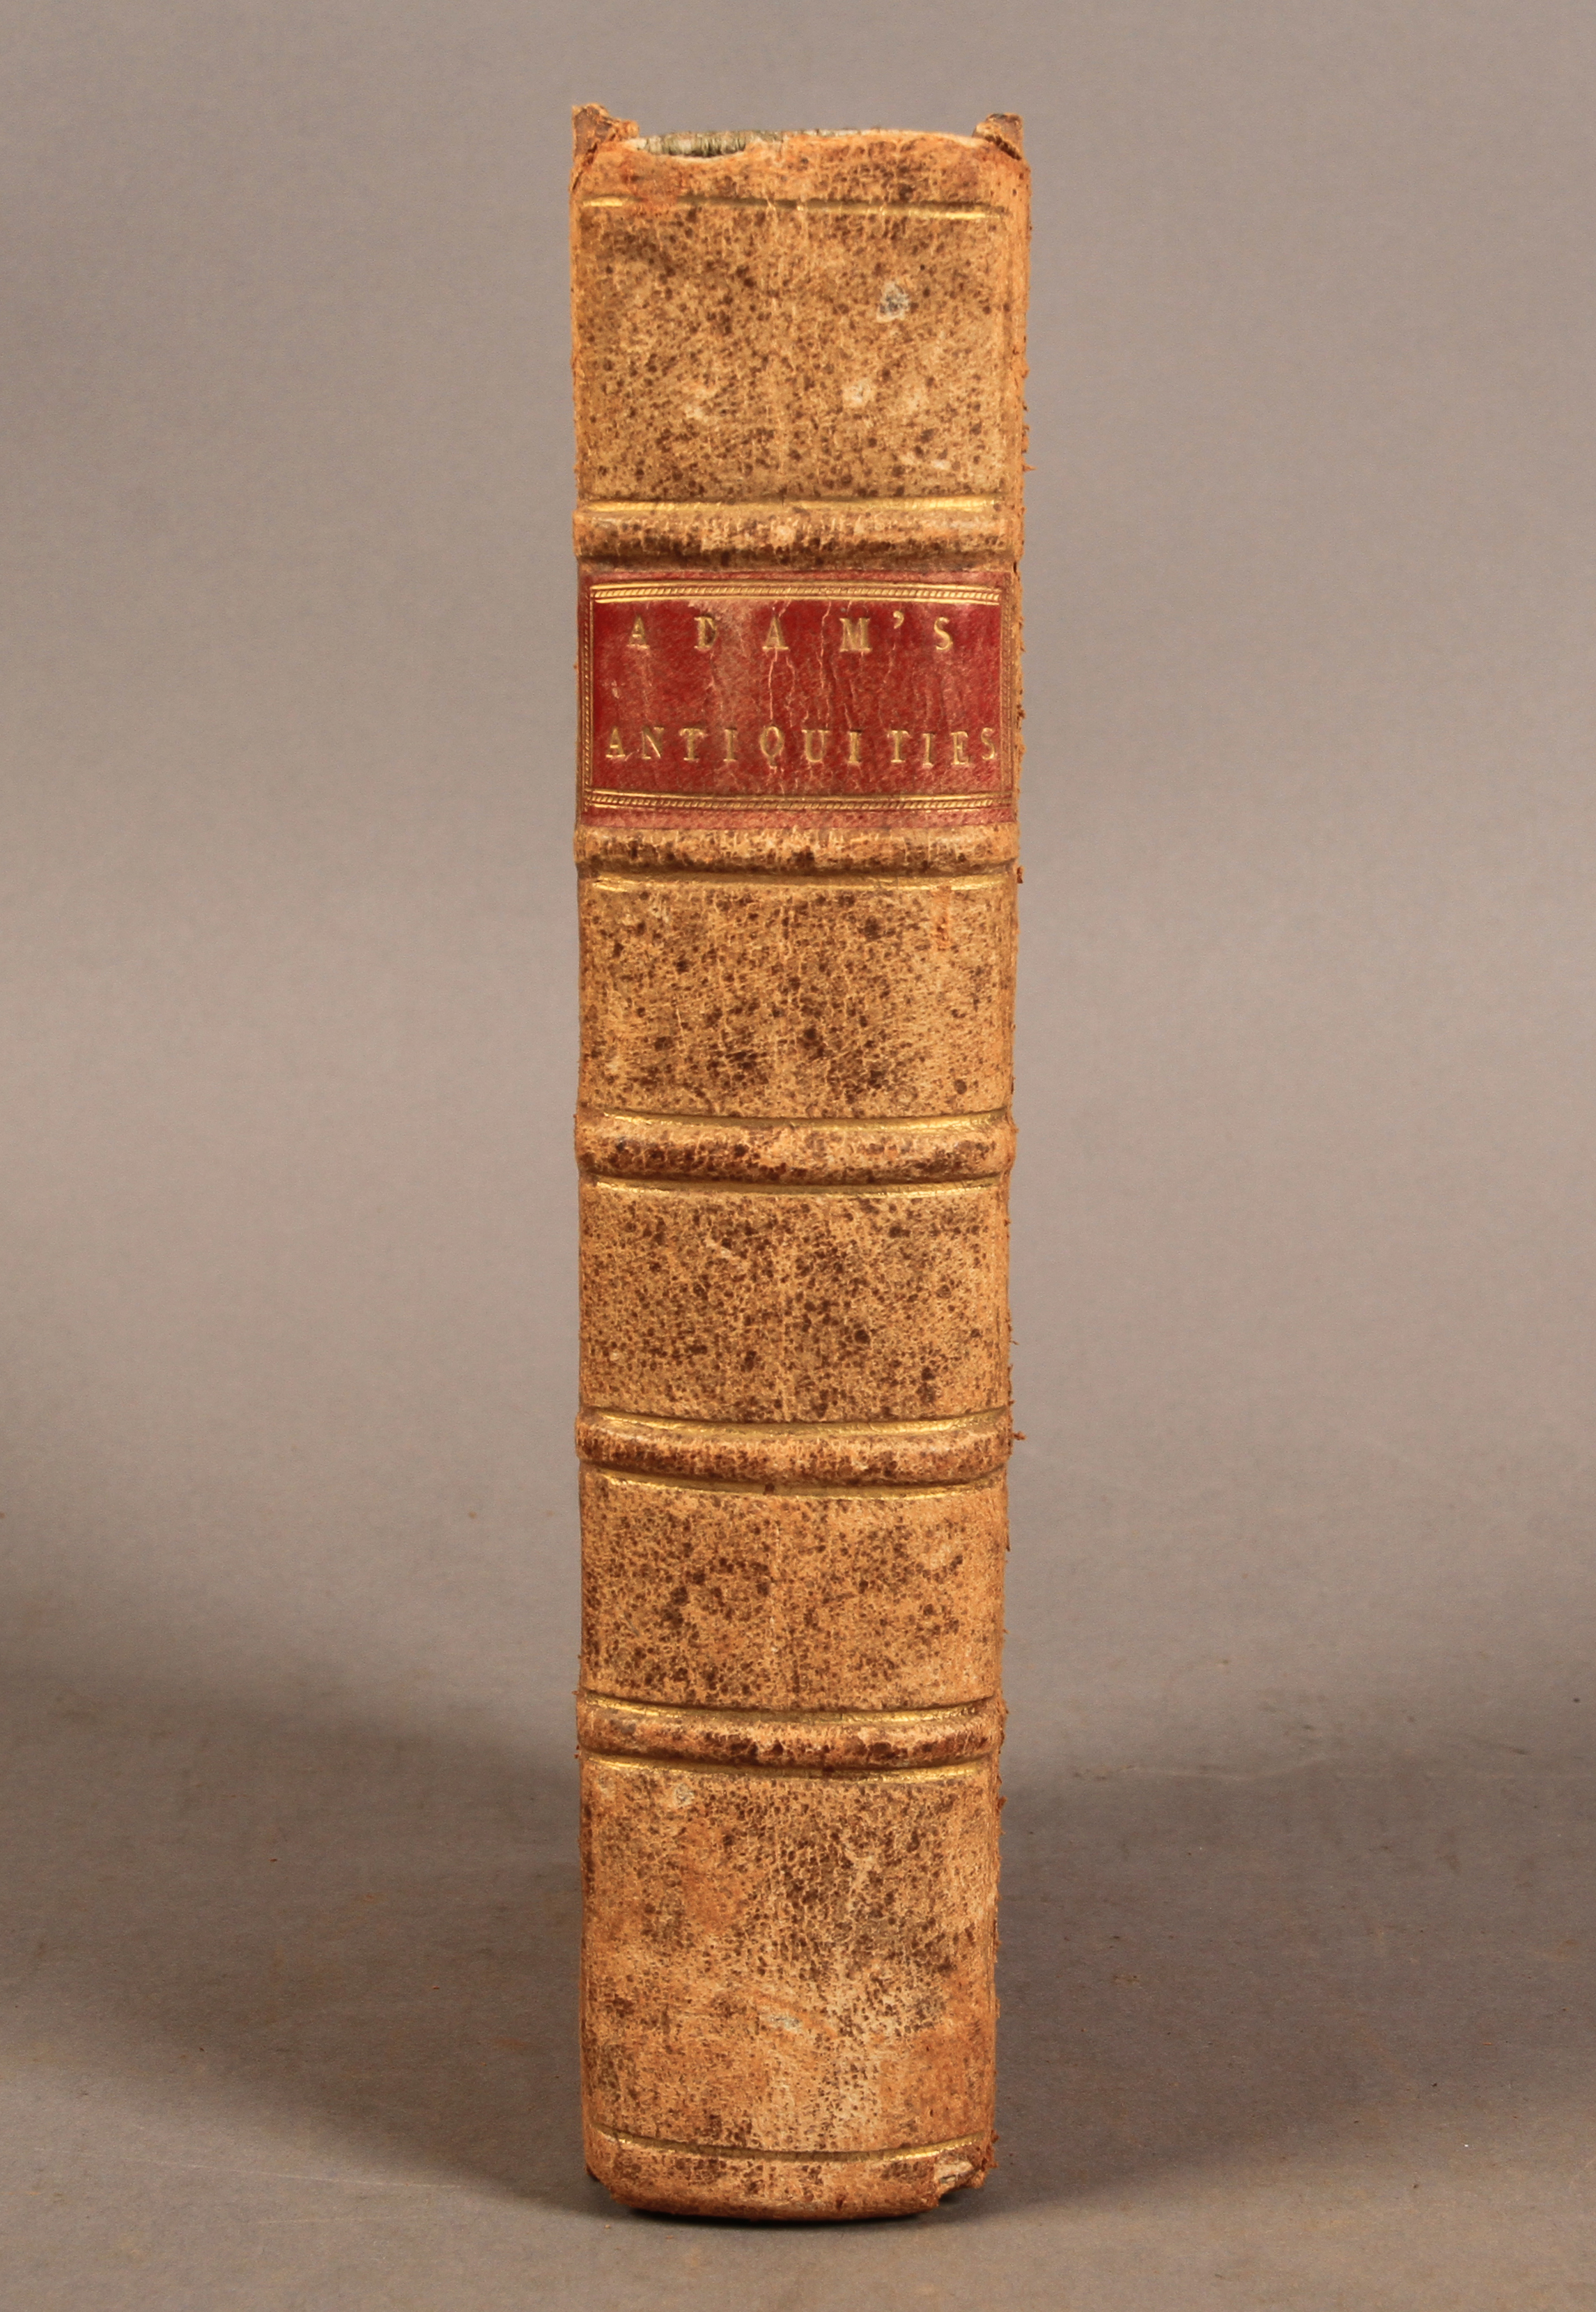 Adam, Alexander, Roman Antiquities: or, an Account of the Manners and Customs of the Romans. - Image 2 of 2